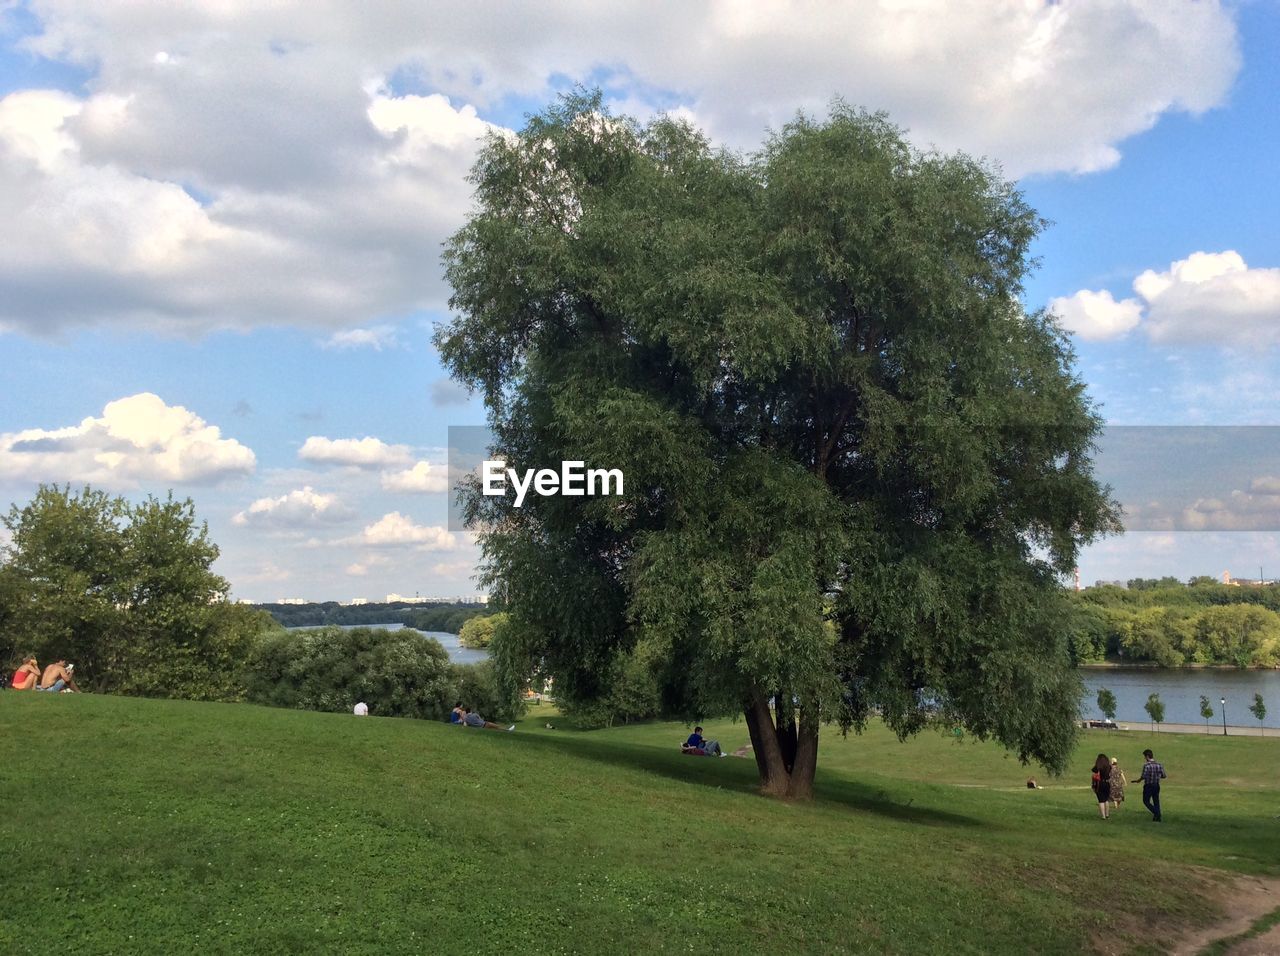 Tree in park against cloudy sky